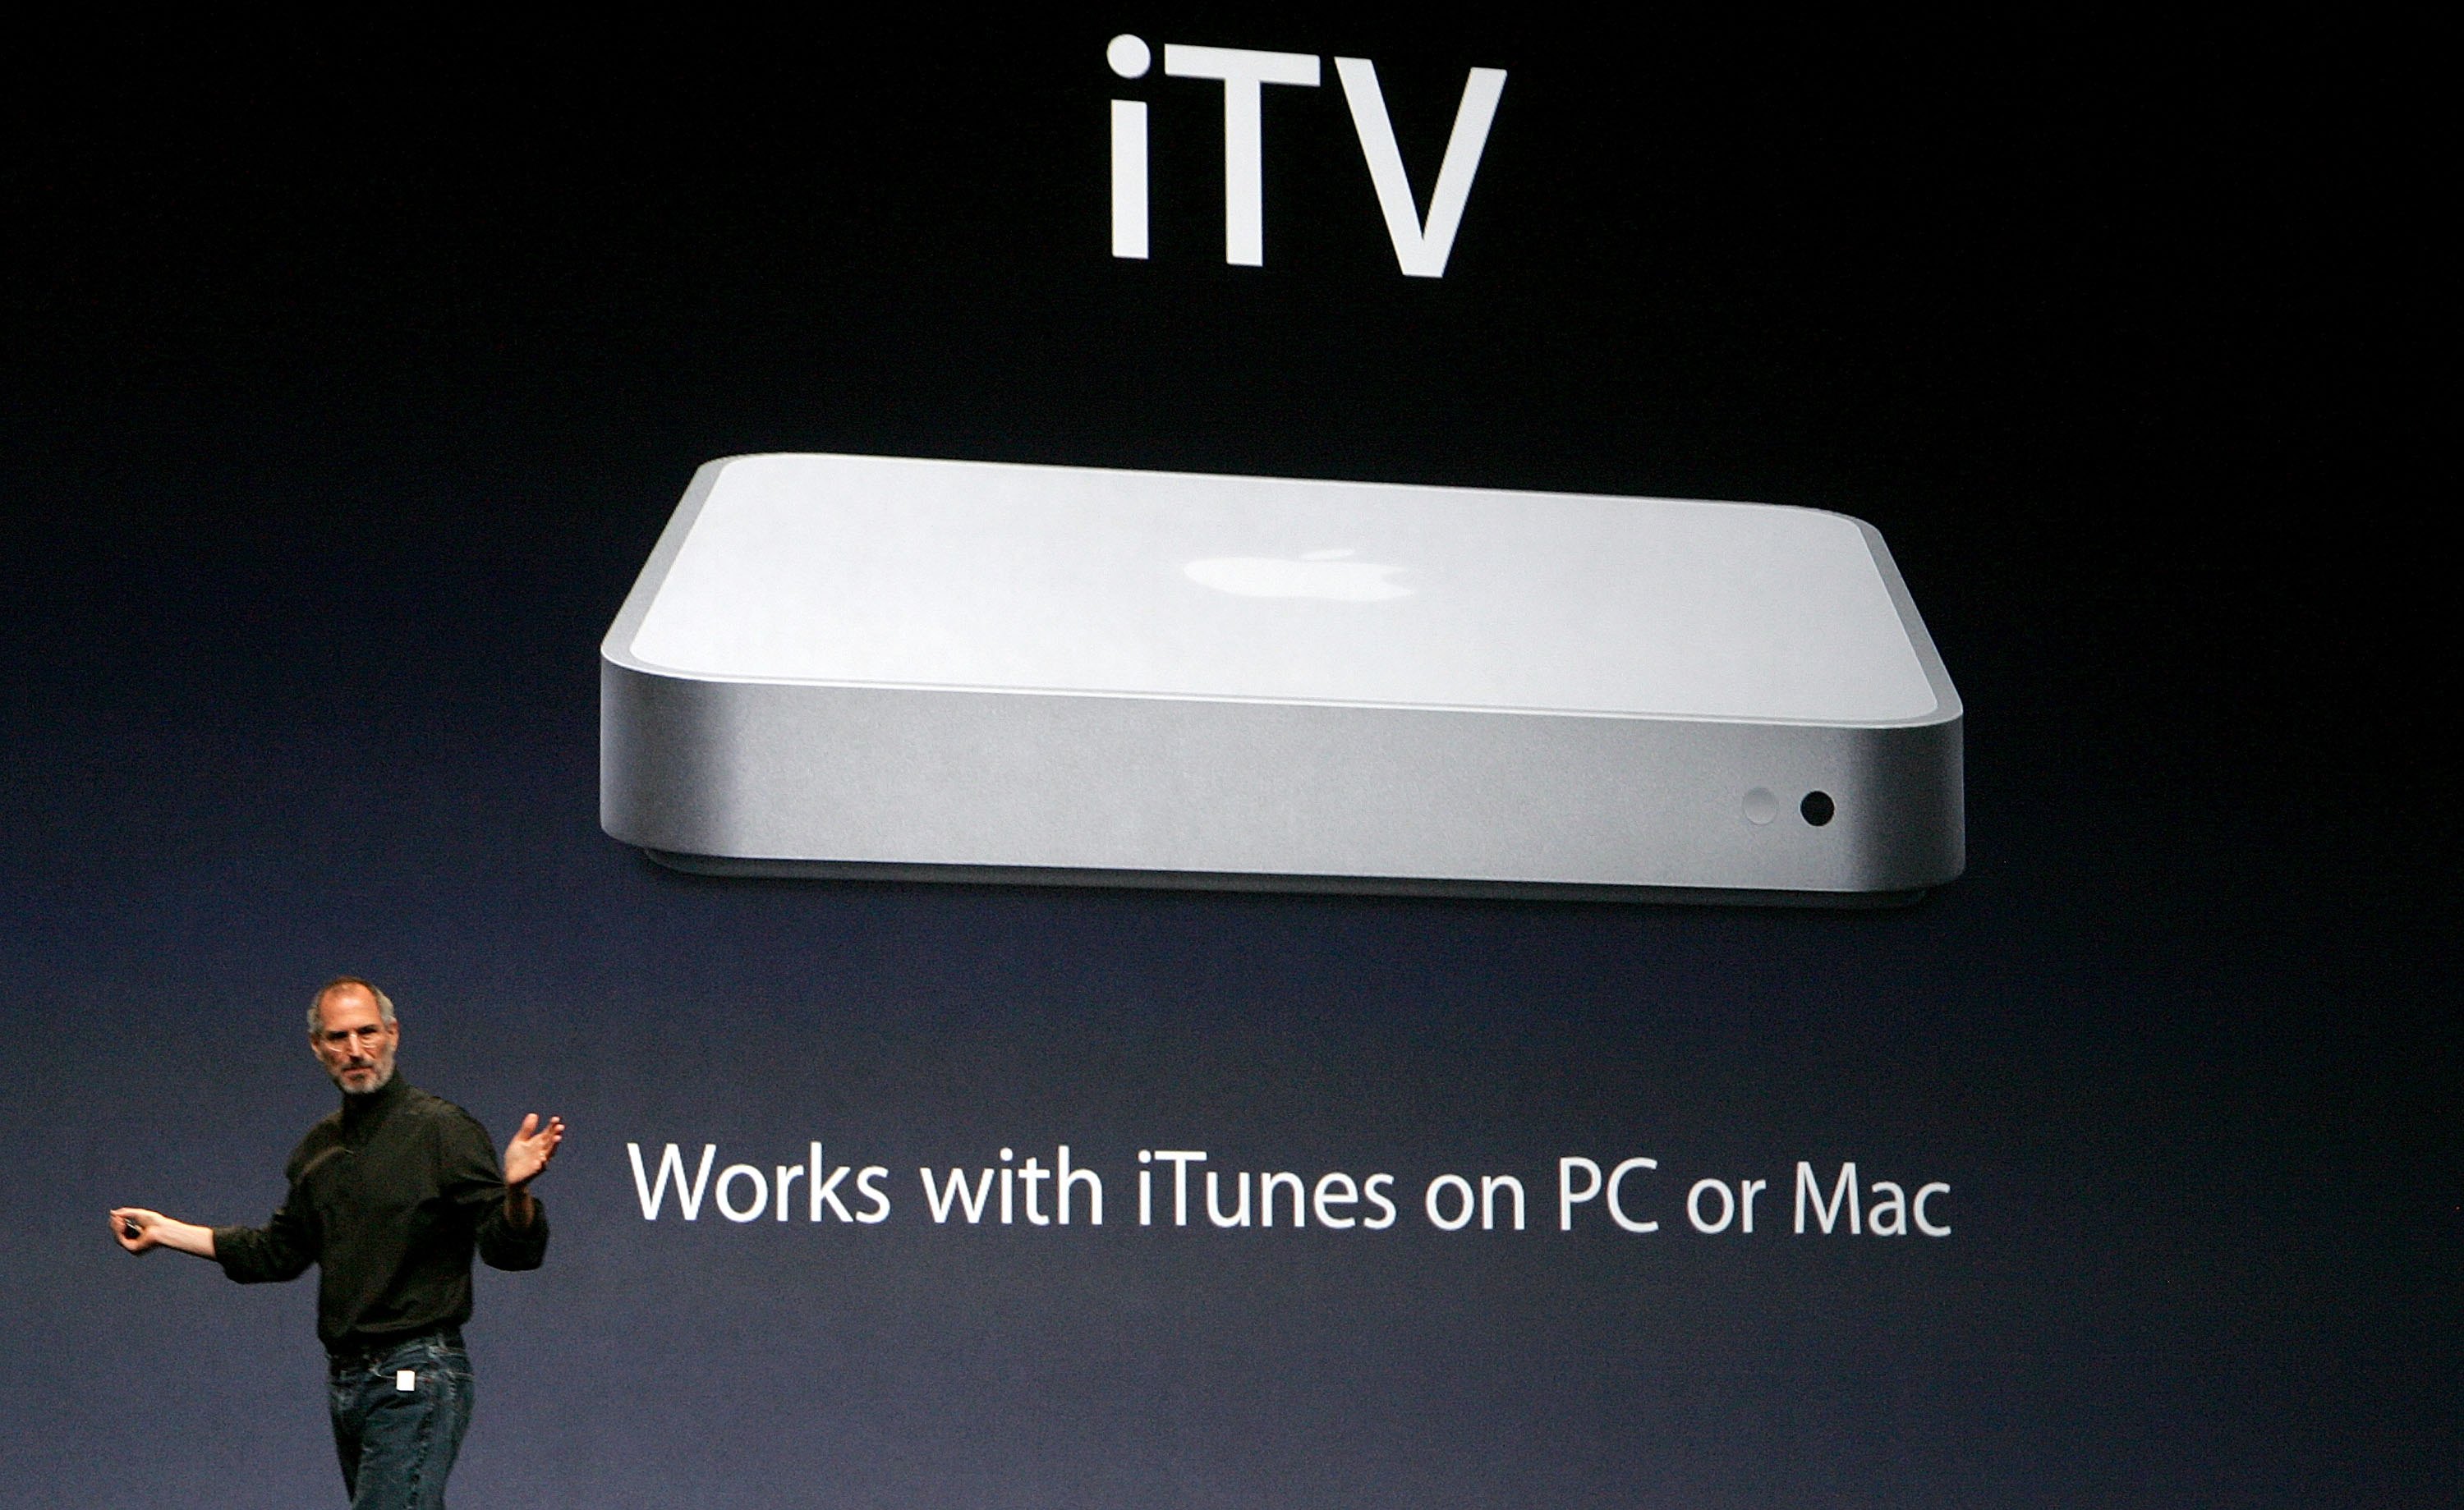 Apple Unveils Video Games For I-Tunes And Two New I-Pod Models